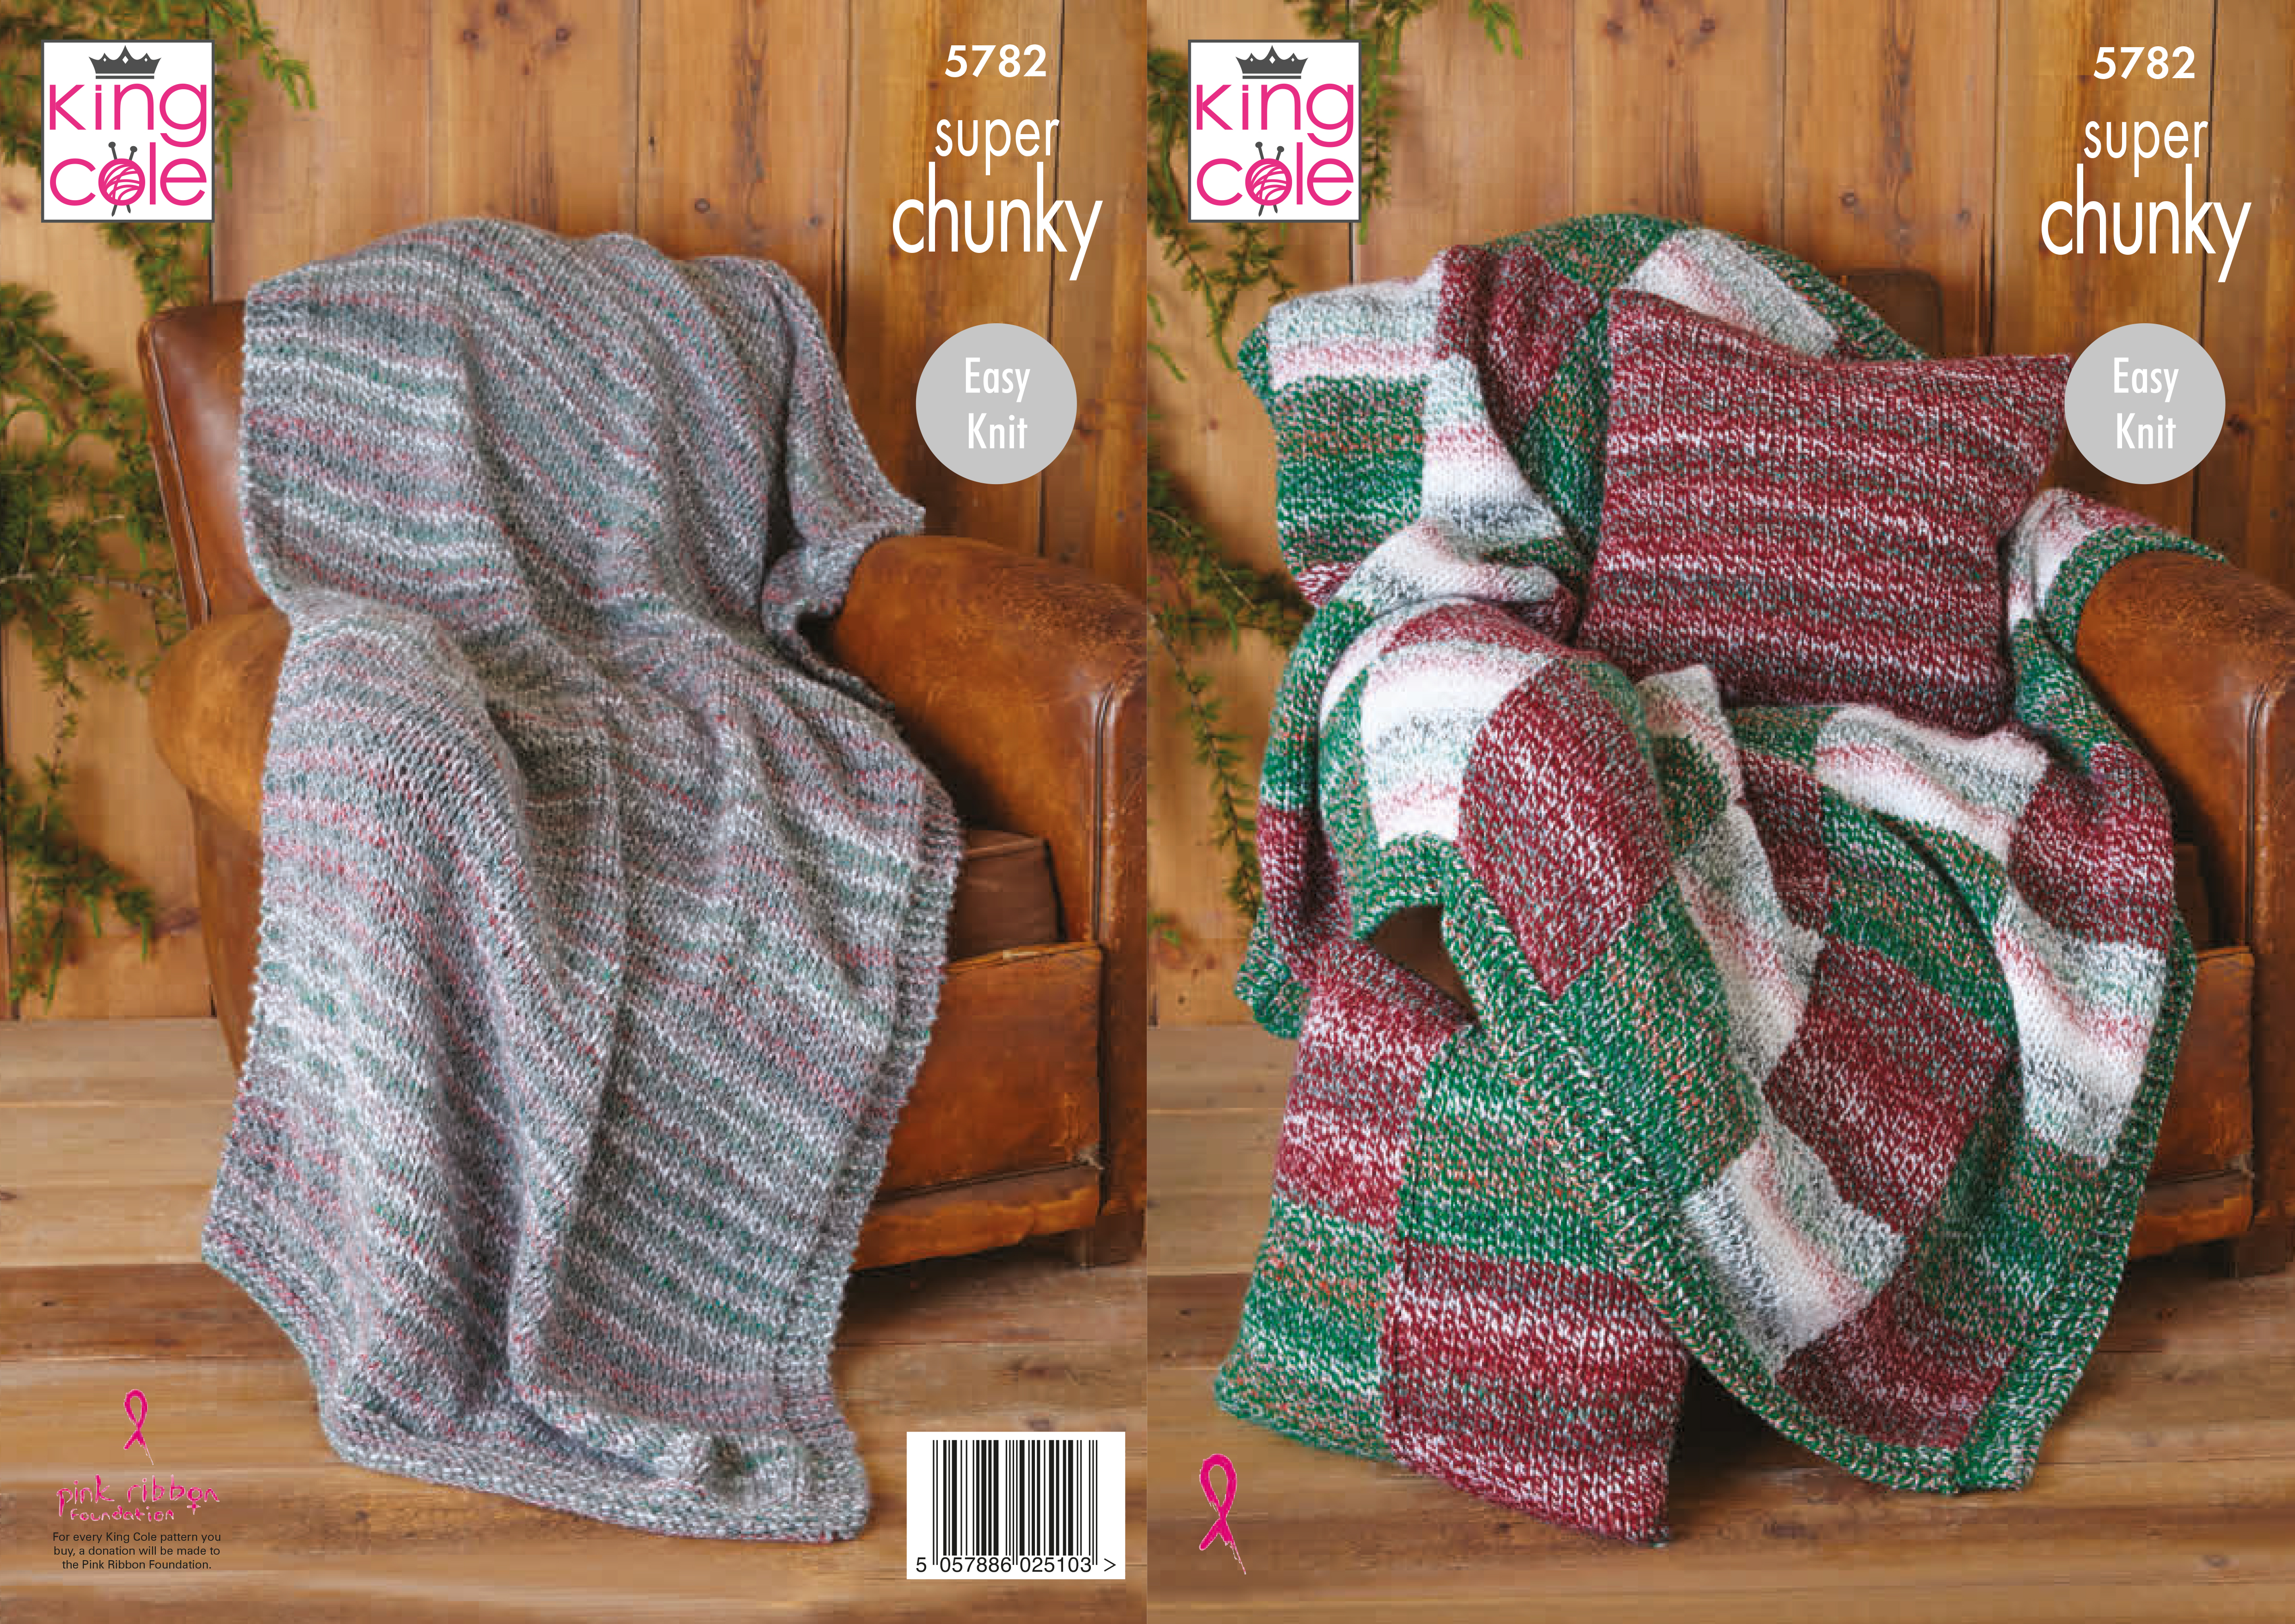 Blanket & Bed Runner Knitted in Christmas Super Chunky 5782 x3 - Click Image to Close